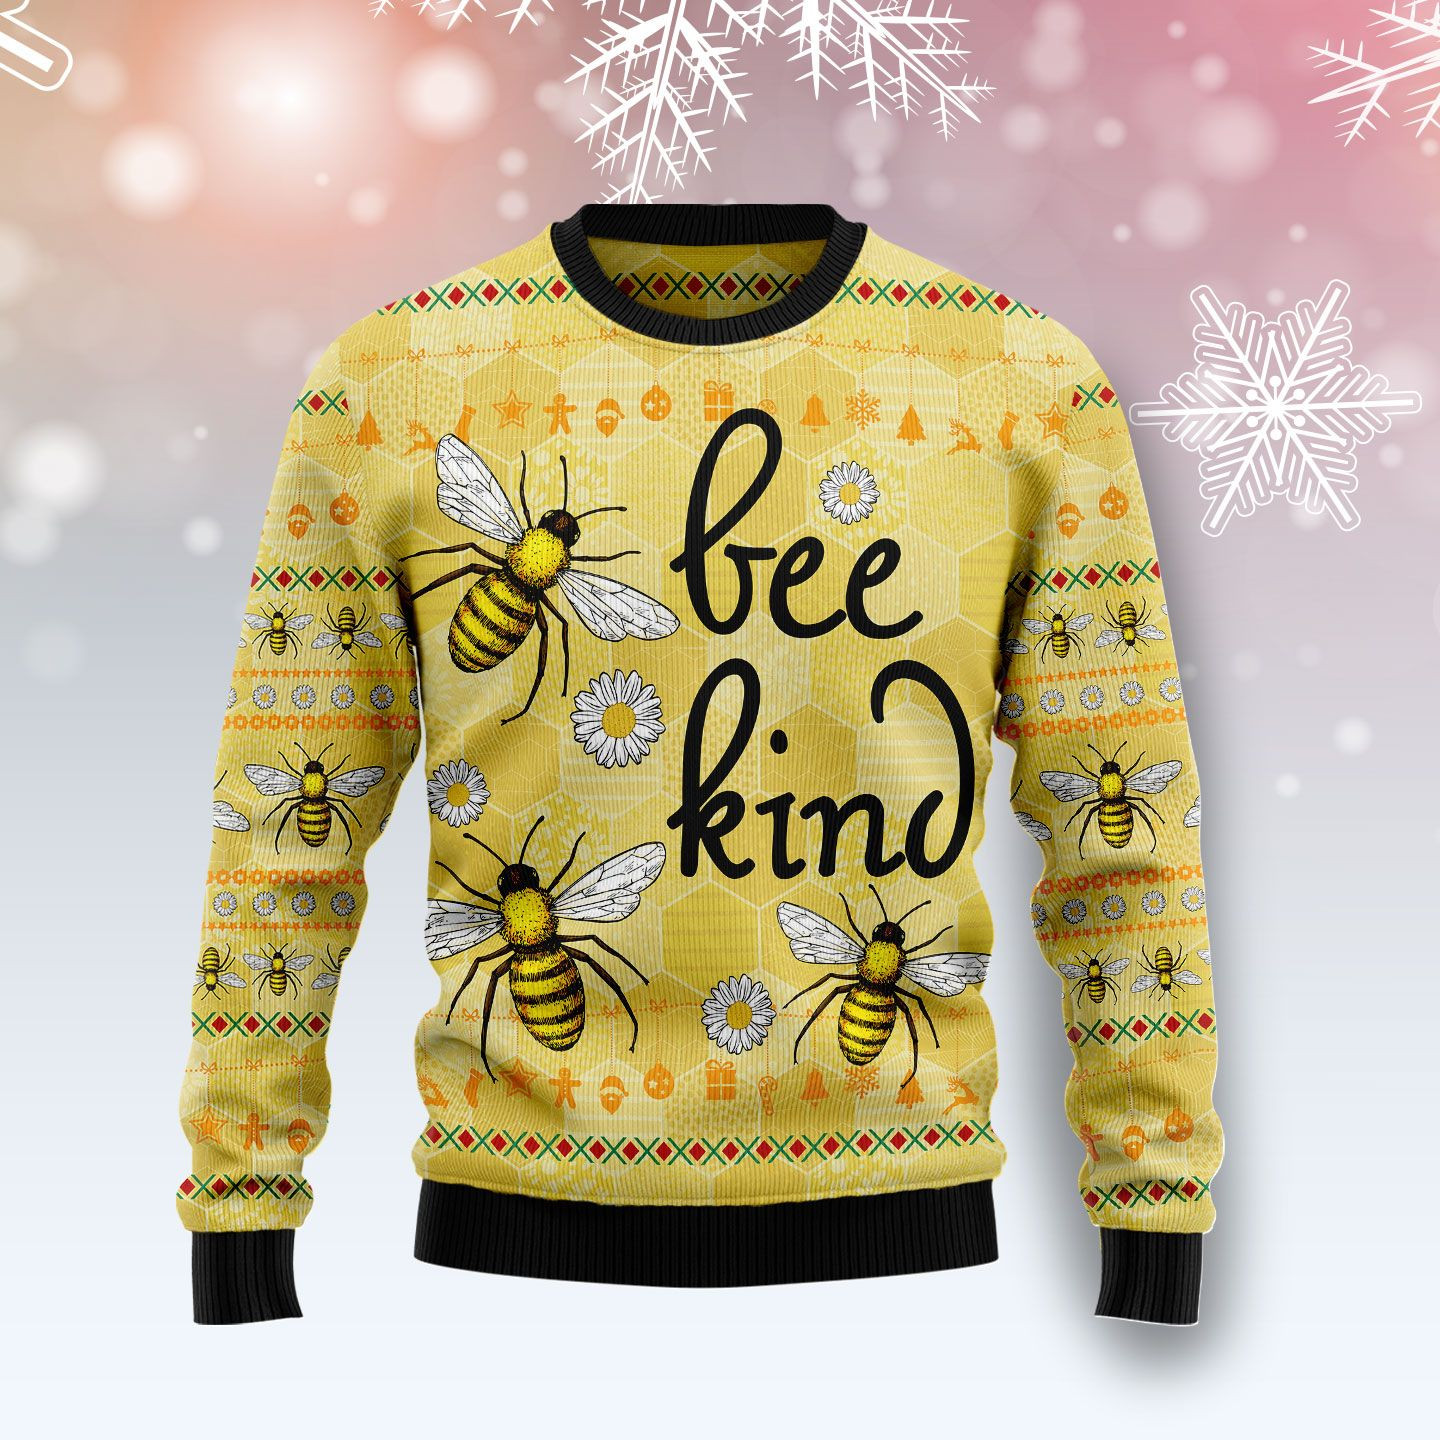 Bee Kind Ugly Christmas Sweater Ugly Sweater For Men Women